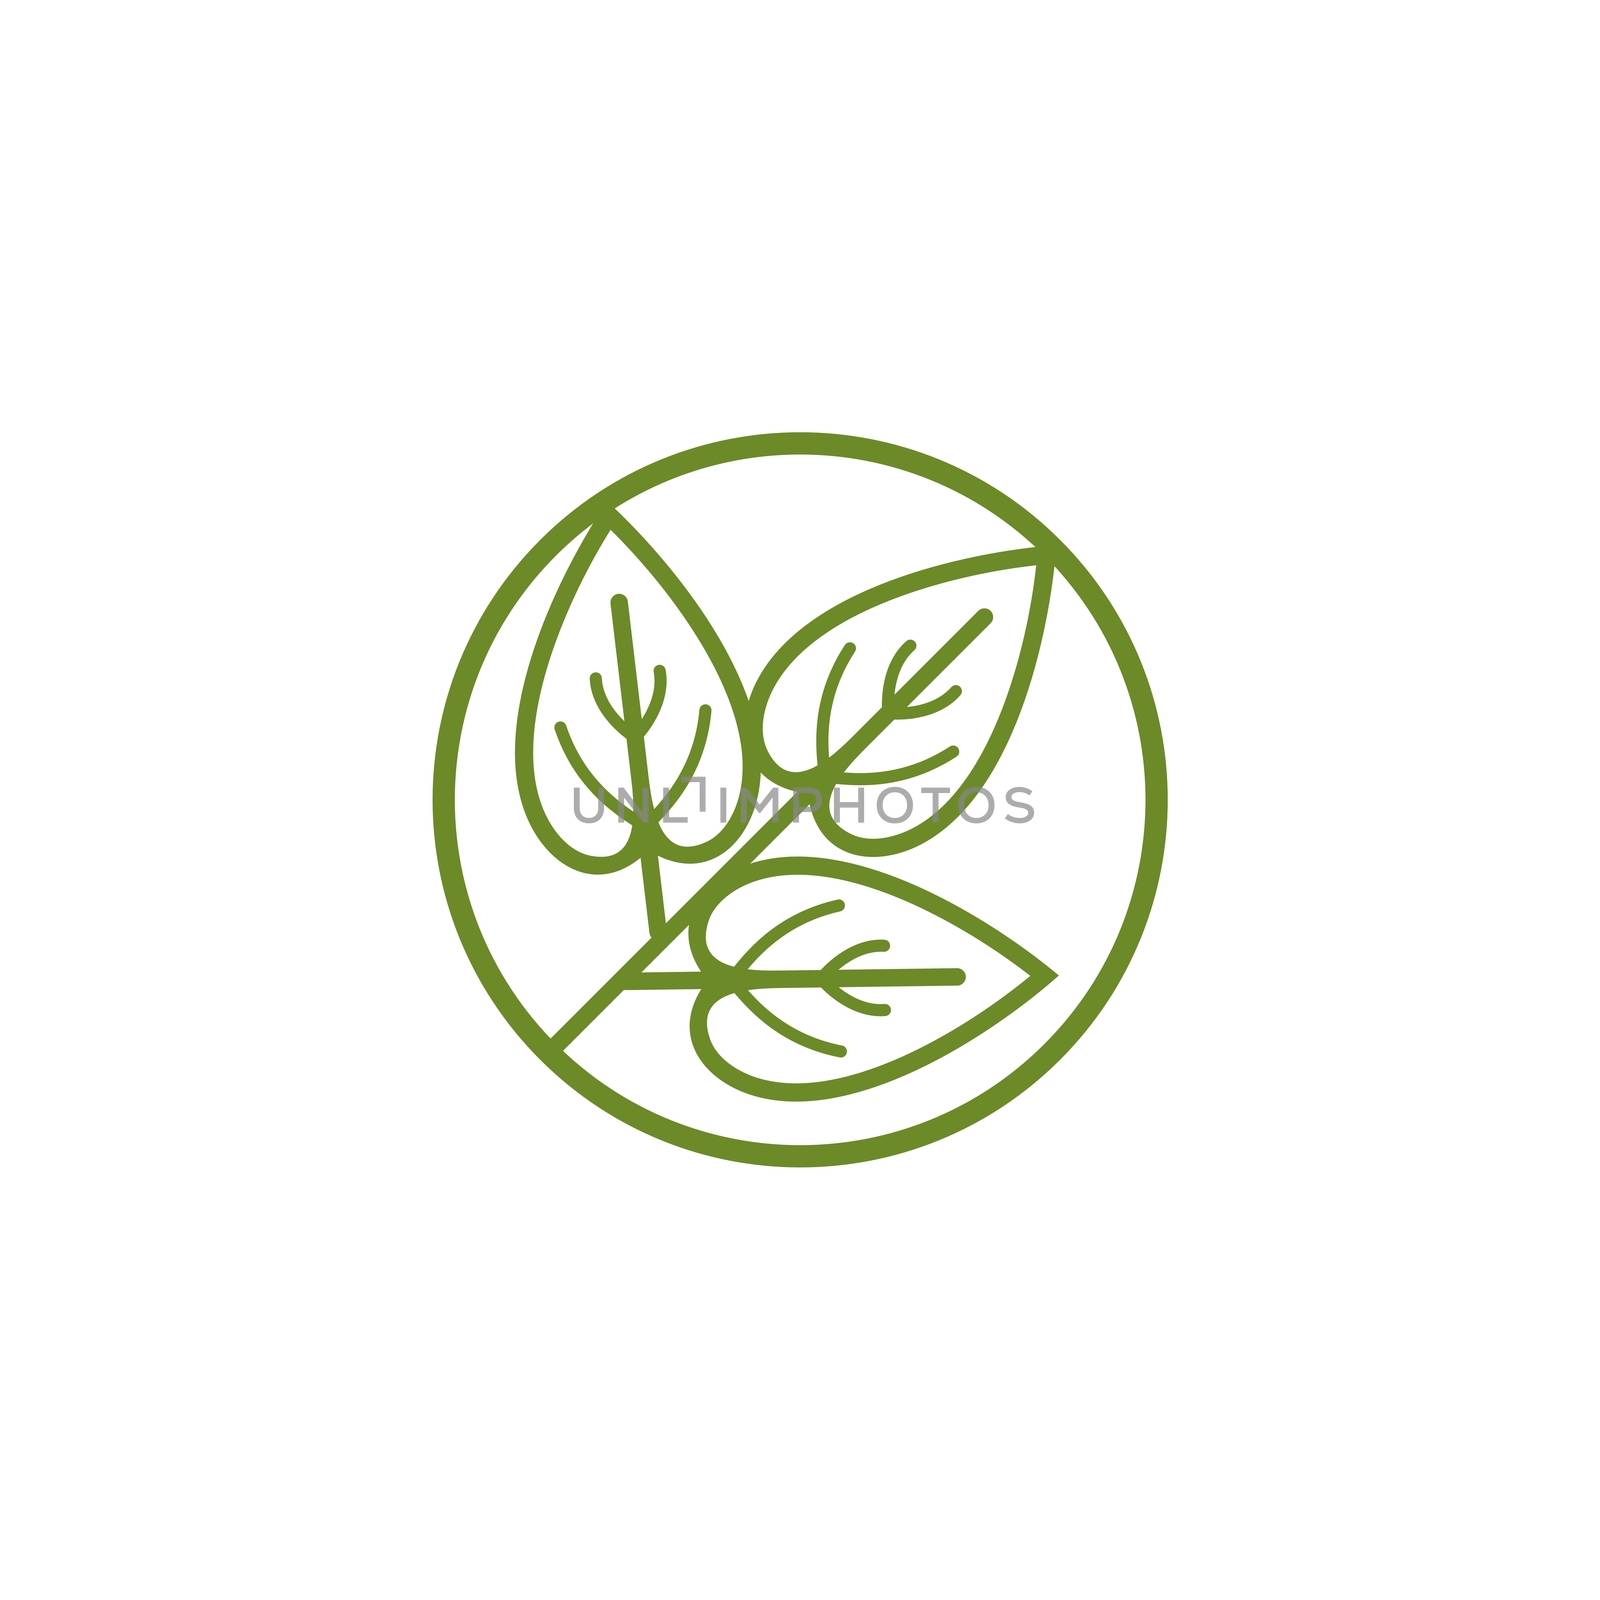 Circle Green Leaves Logo Template Illustration Design. Vector EPS 10. by soponyono1